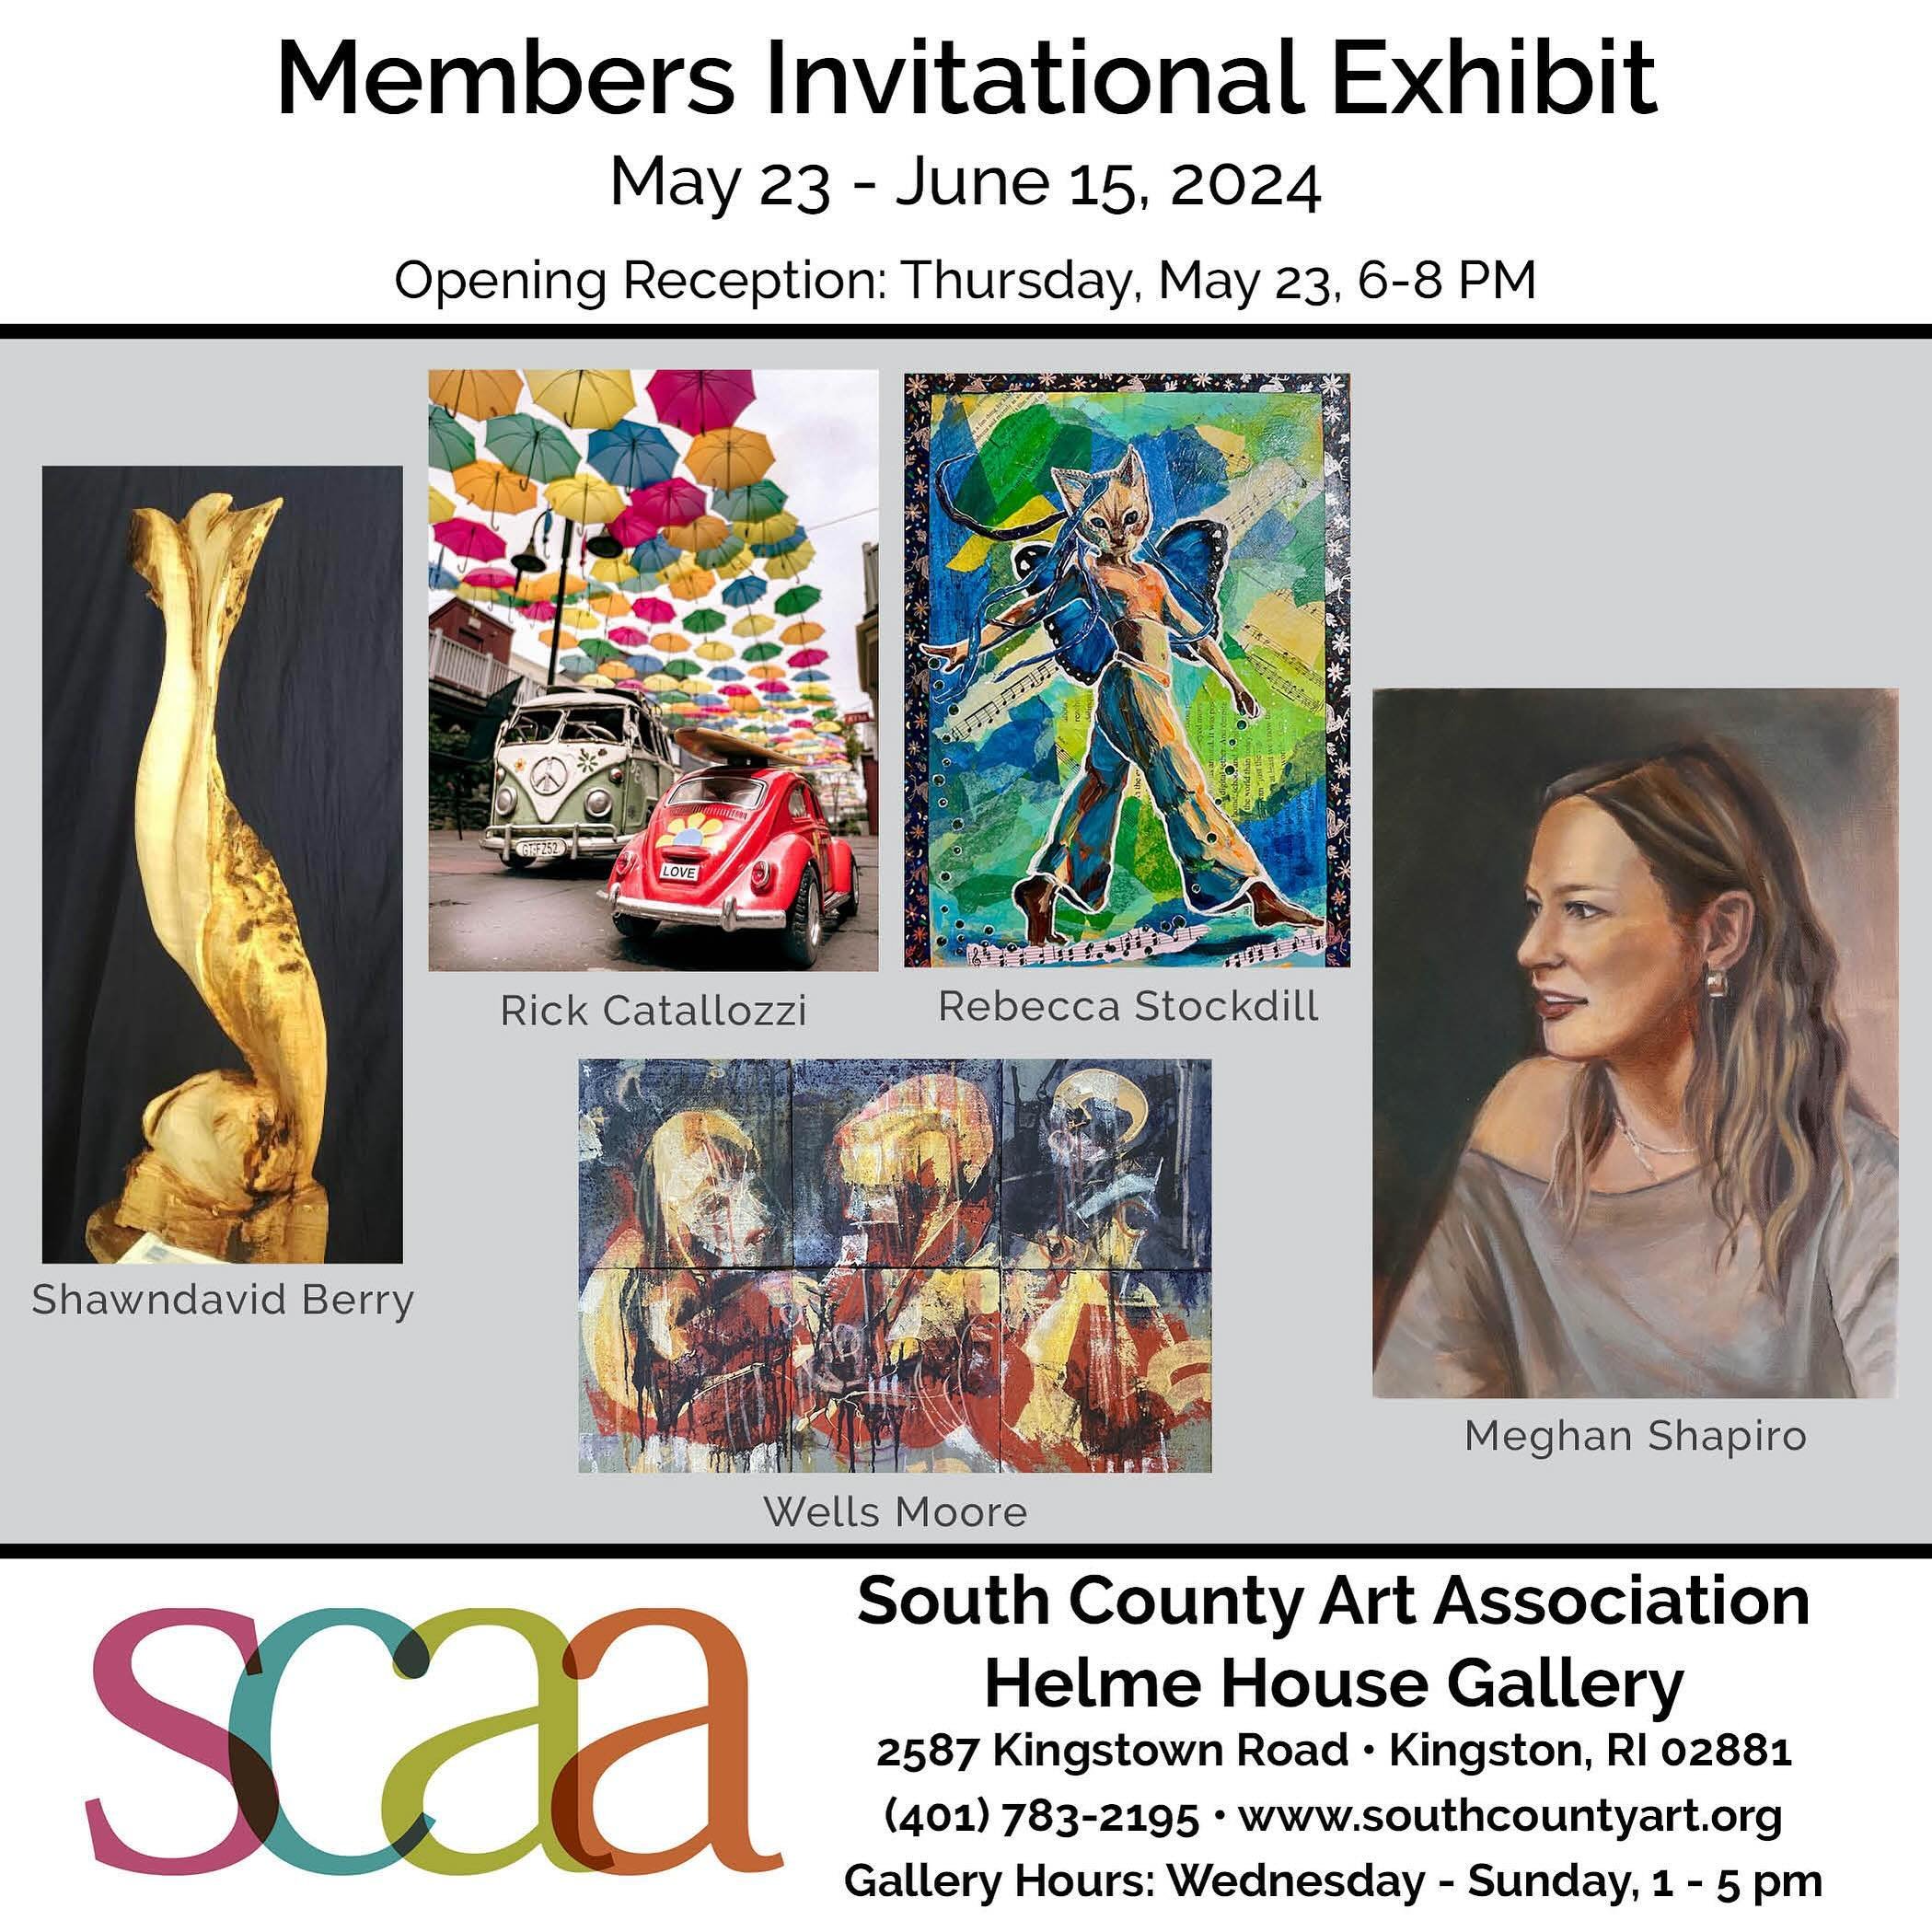 Thrilled to share that I&rsquo;ll be part of the @scartri member invitational! Join me on May 23rd at 6 pm for the opening reception at the historic Helme House Gallery. Come discover a blend of my artworks in this stunning venue hosted by the South 